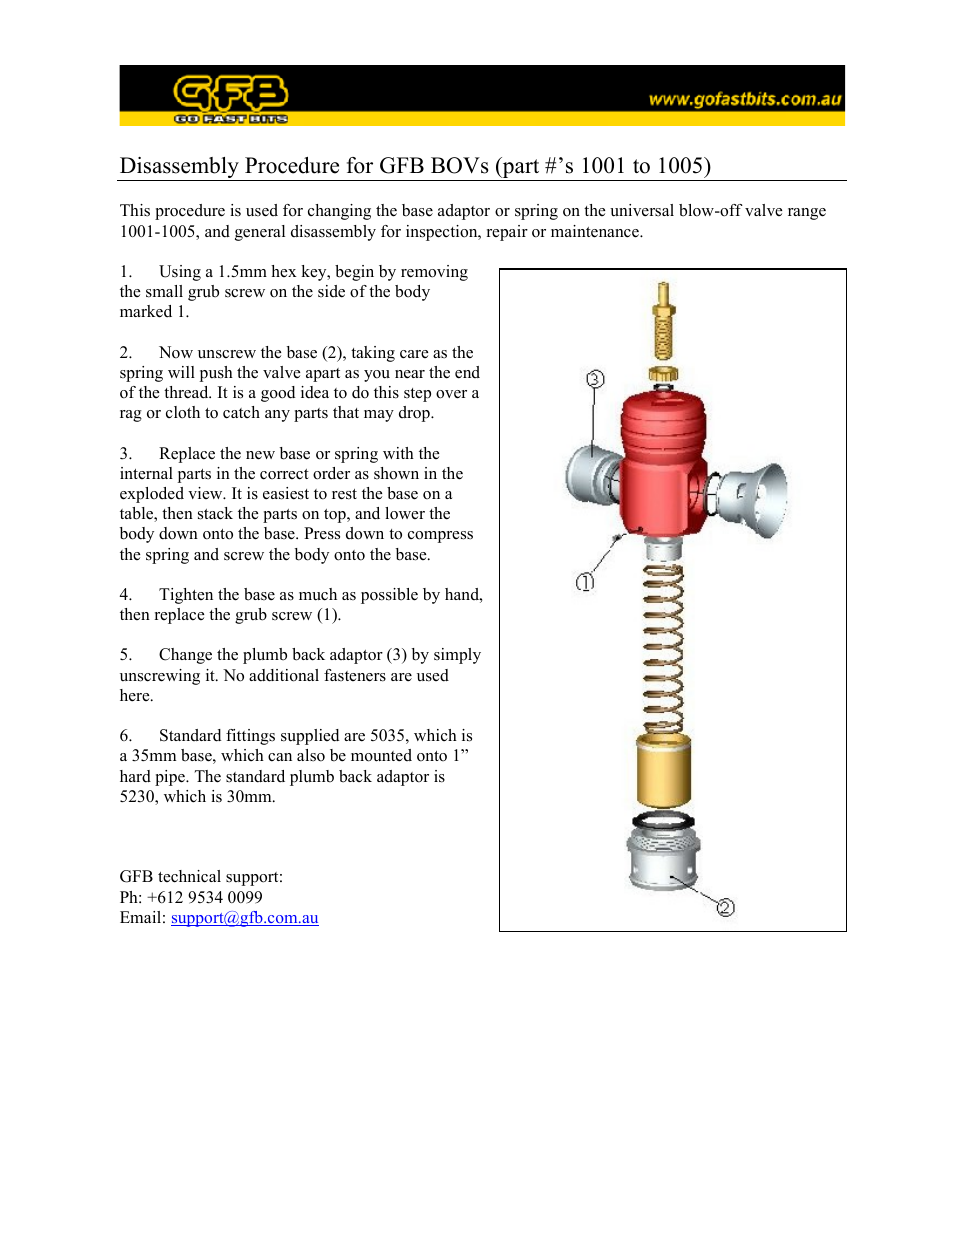 BOVs (part 1001 to 1005) - Disassembly Procedure